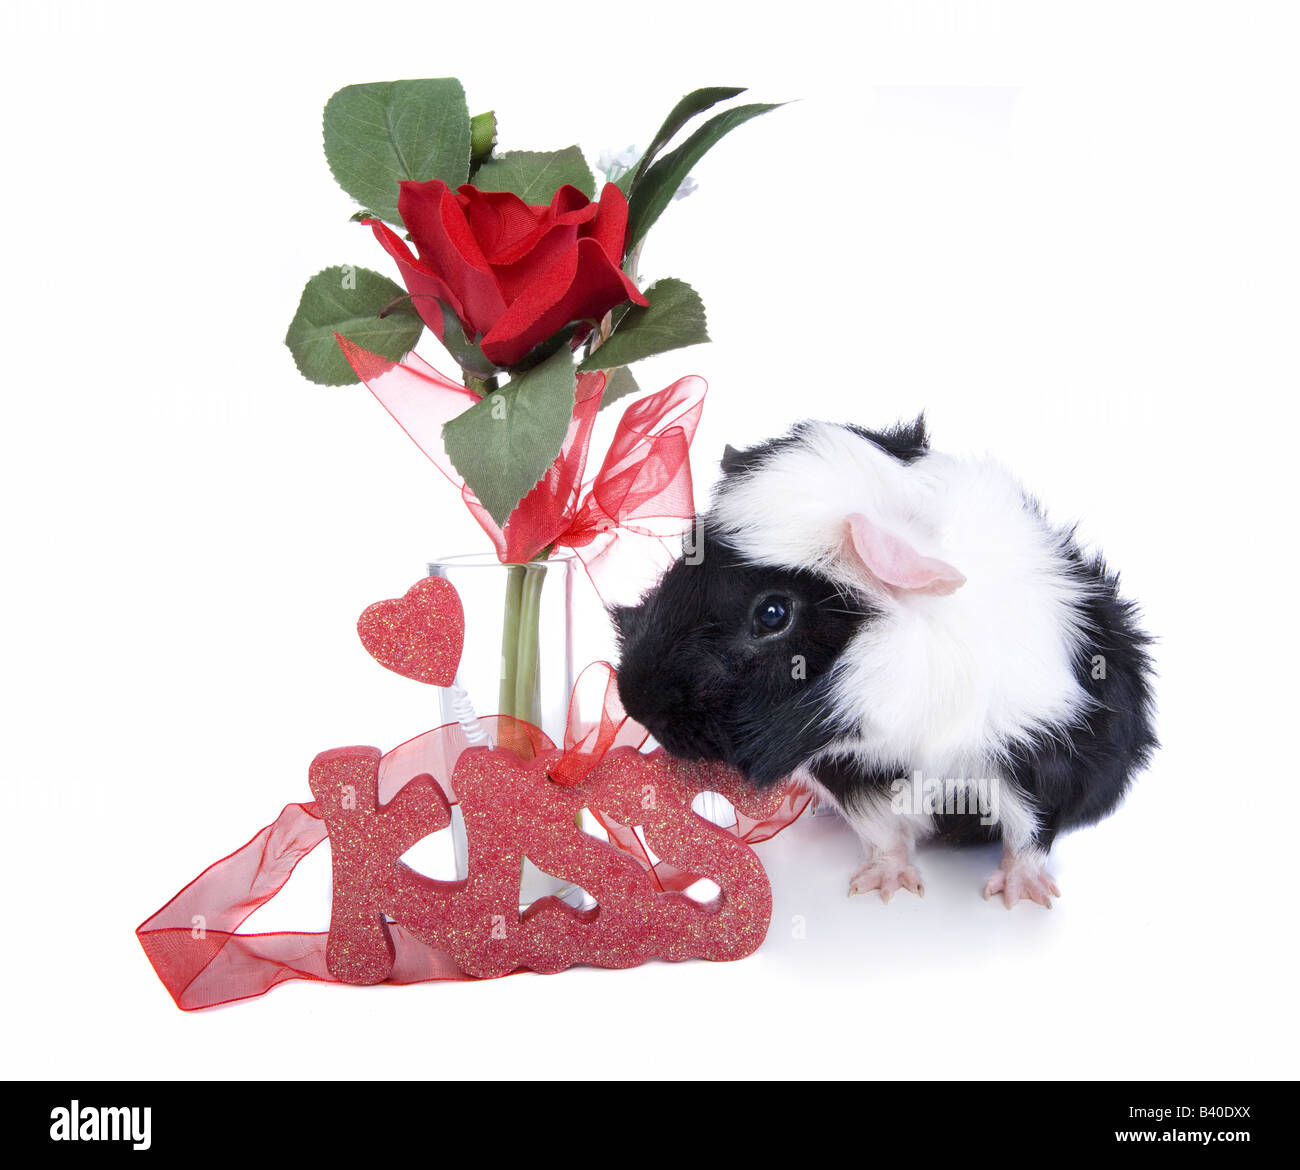 Cute Black and white Valentine Guinea pig or Cavy with red rose in a vase and a Kiss Stock Photo